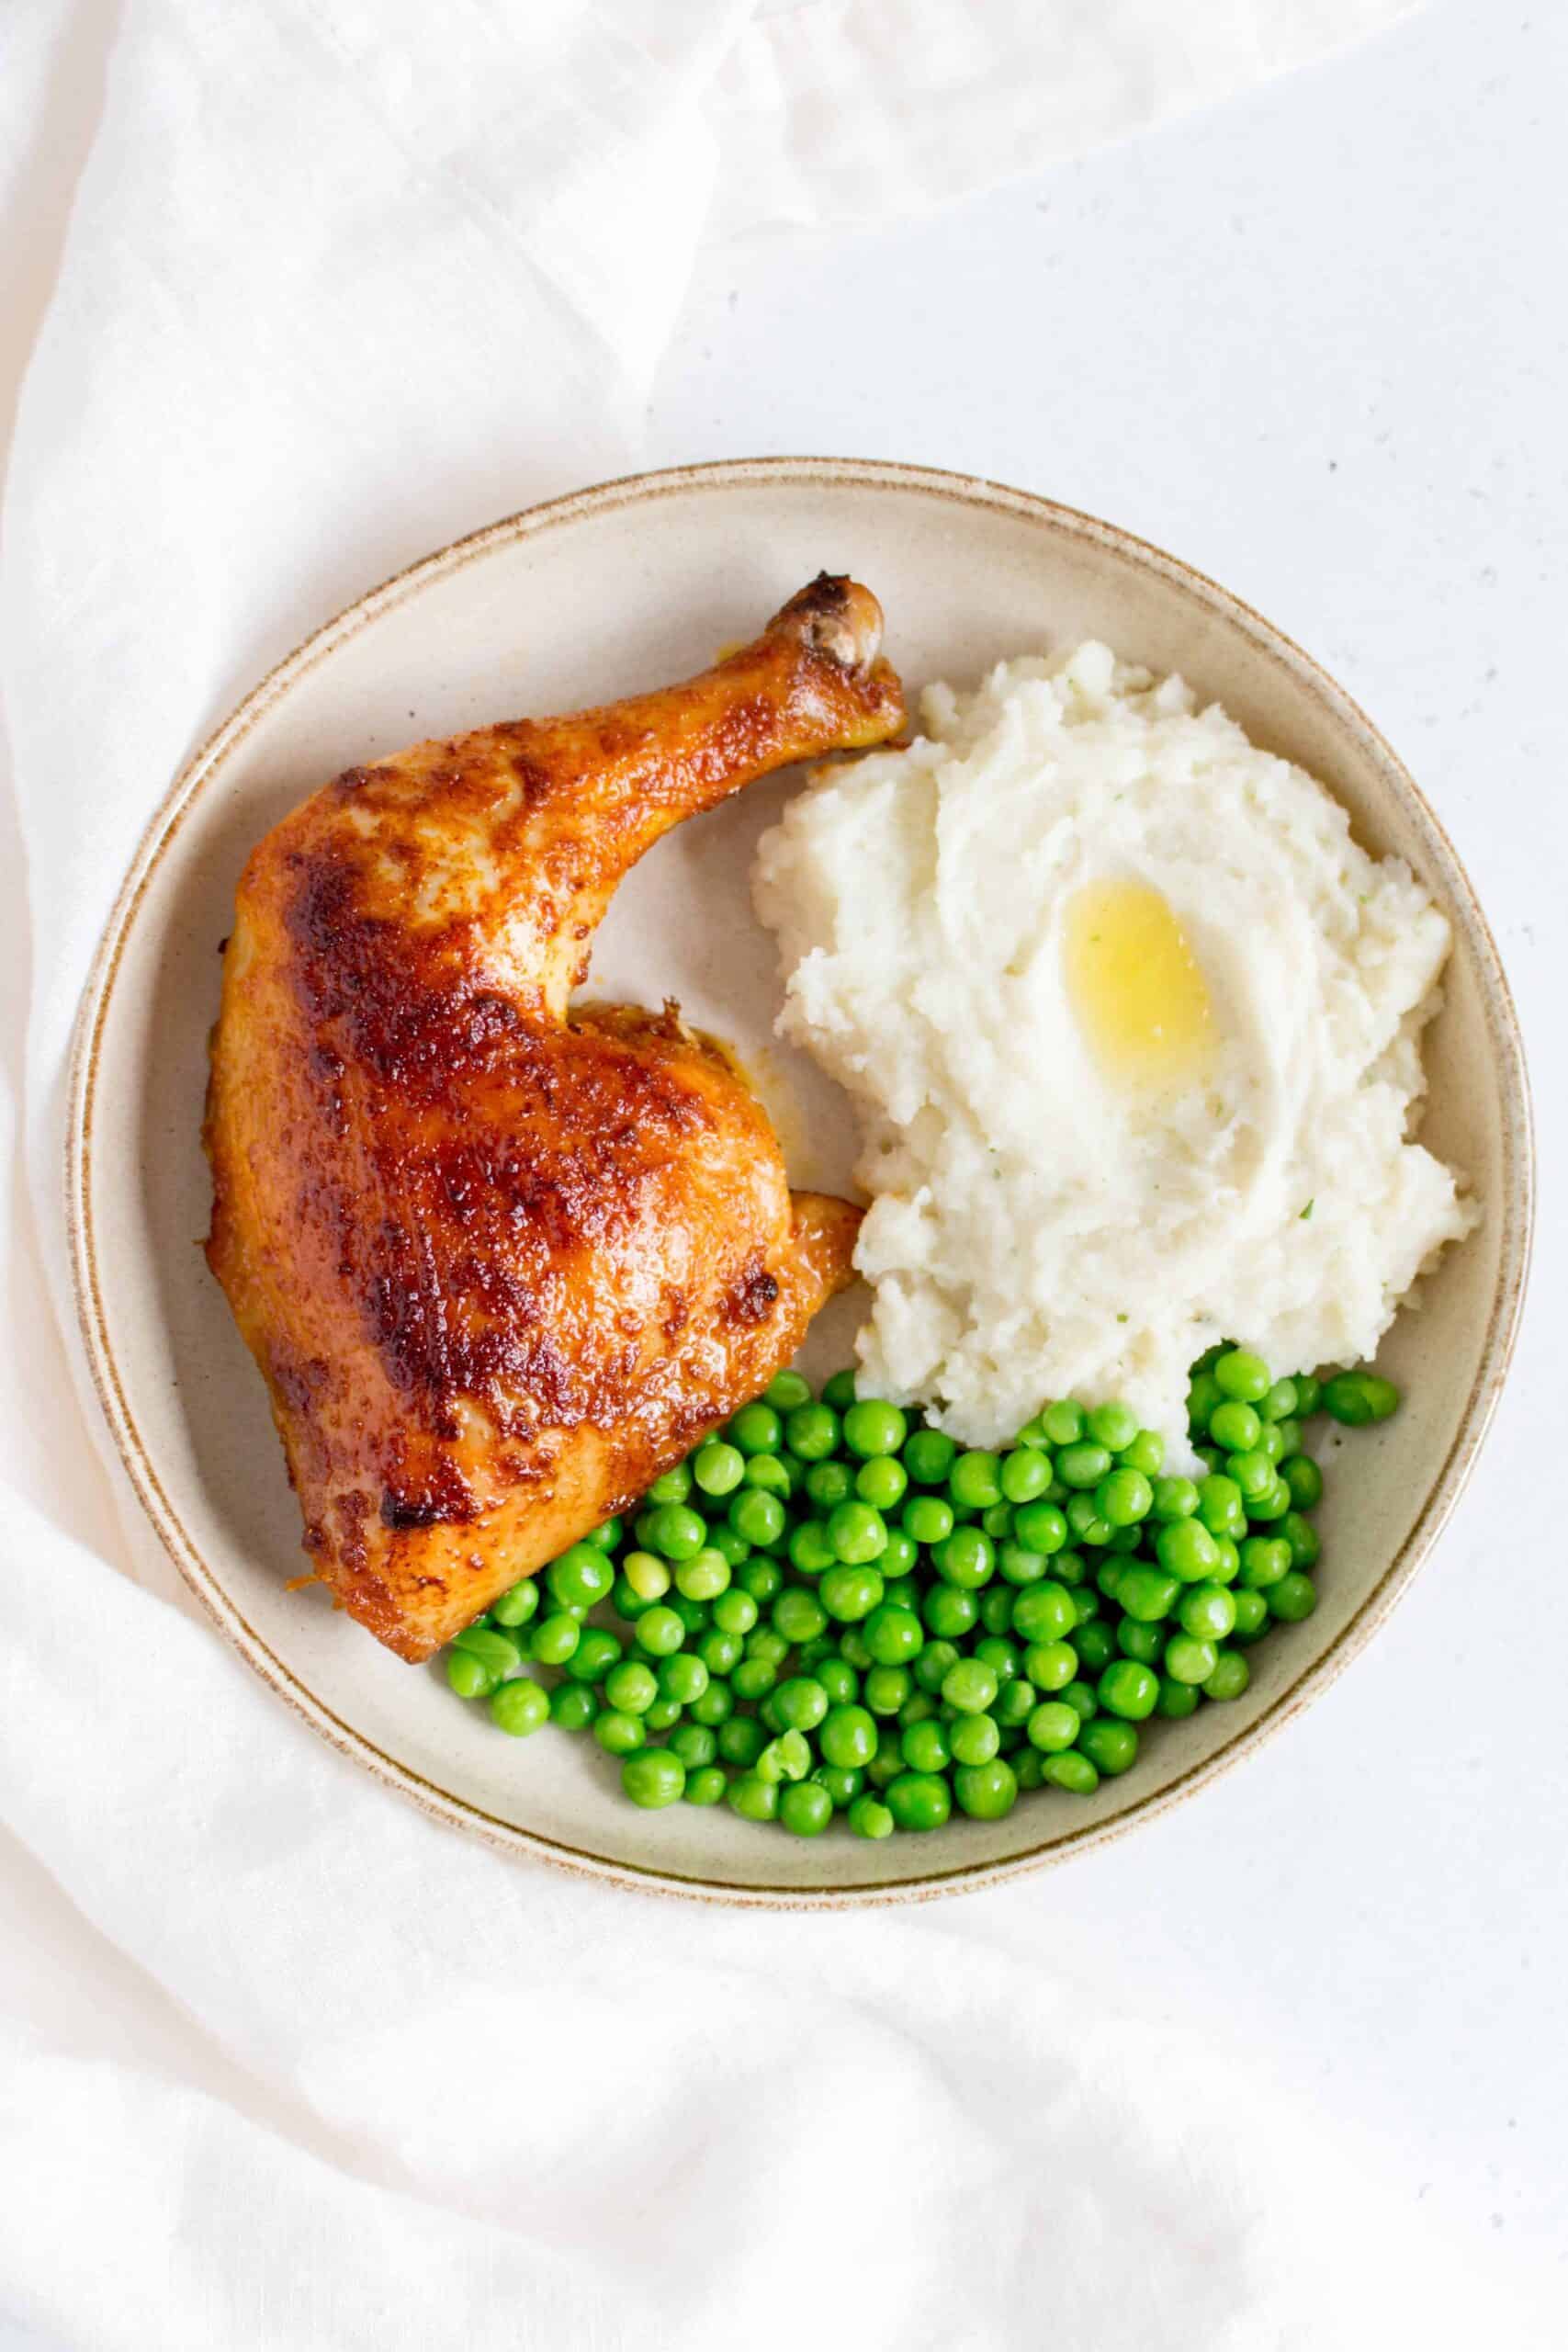 plate with a oven roasted chicken quarter with mashed potatoes and peas.